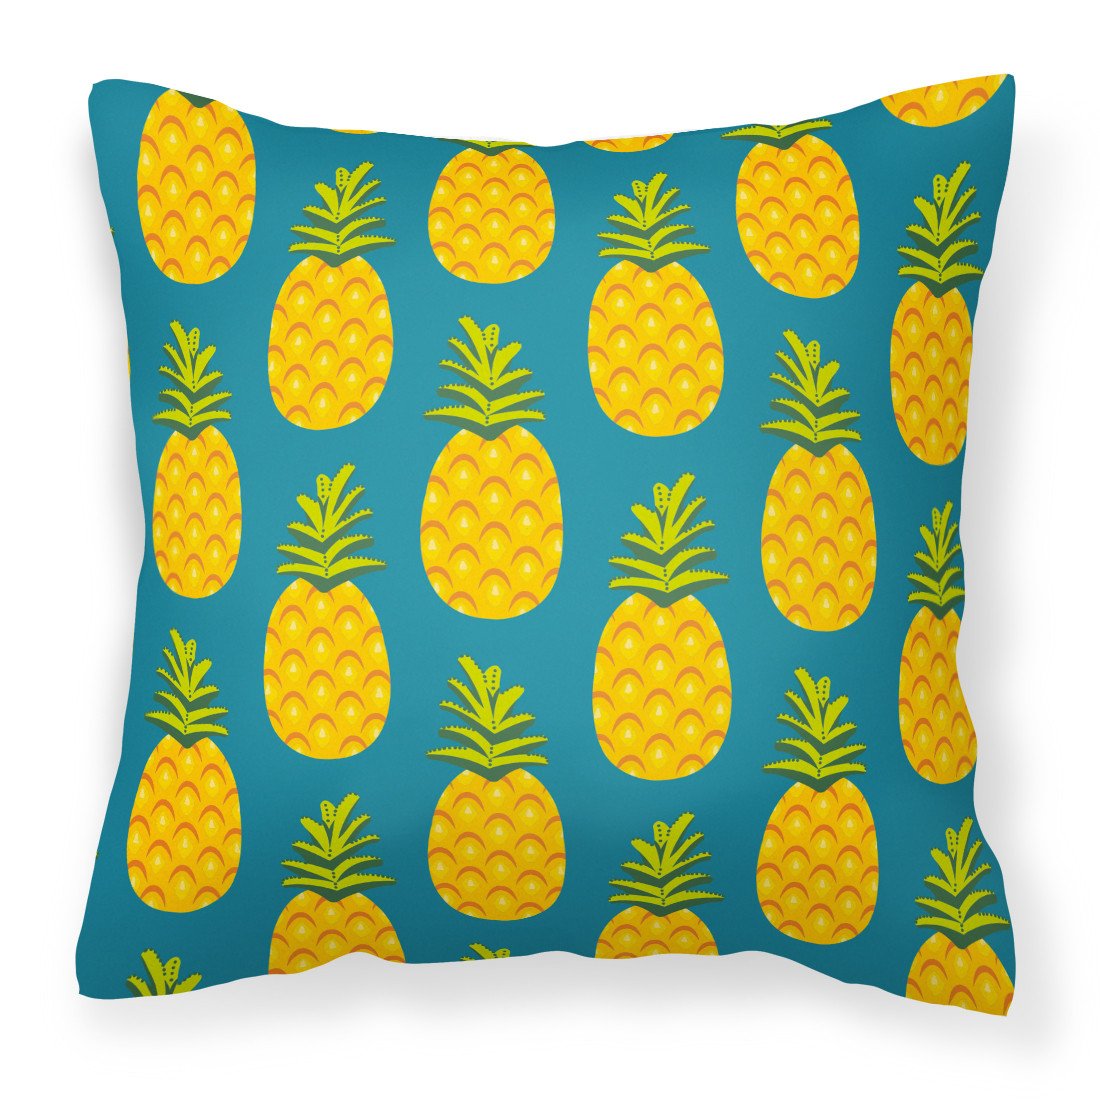 Pineapples on Teal Fabric Decorative Pillow BB5145PW1818 by Caroline's Treasures